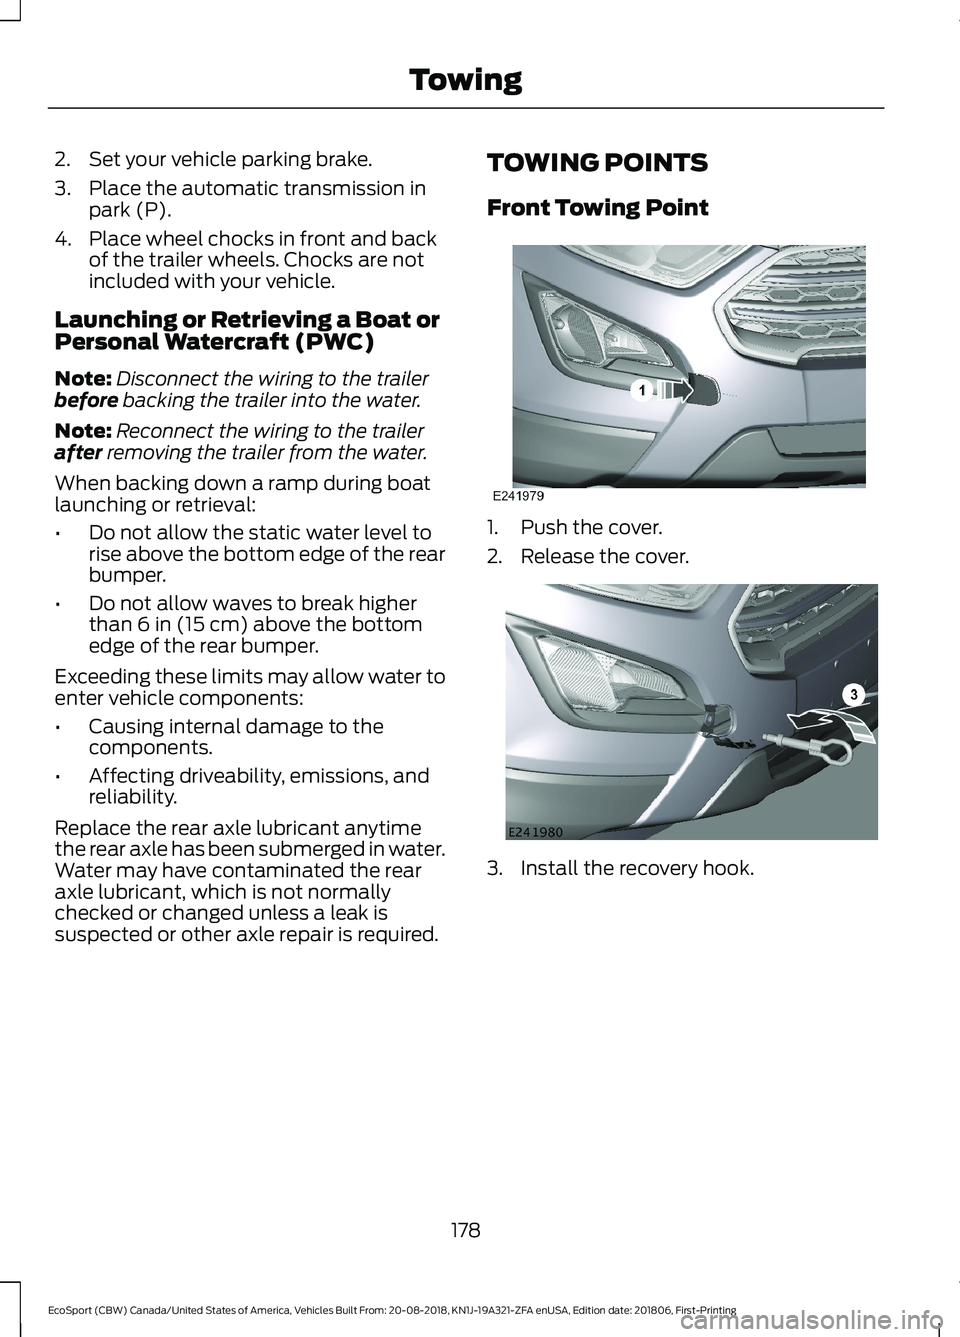 FORD ECOSPORT 2019 Owners Guide 2.Set your vehicle parking brake.
3.Place the automatic transmission inpark (P).
4.Place wheel chocks in front and backof the trailer wheels. Chocks are notincluded with your vehicle.
Launching or Ret